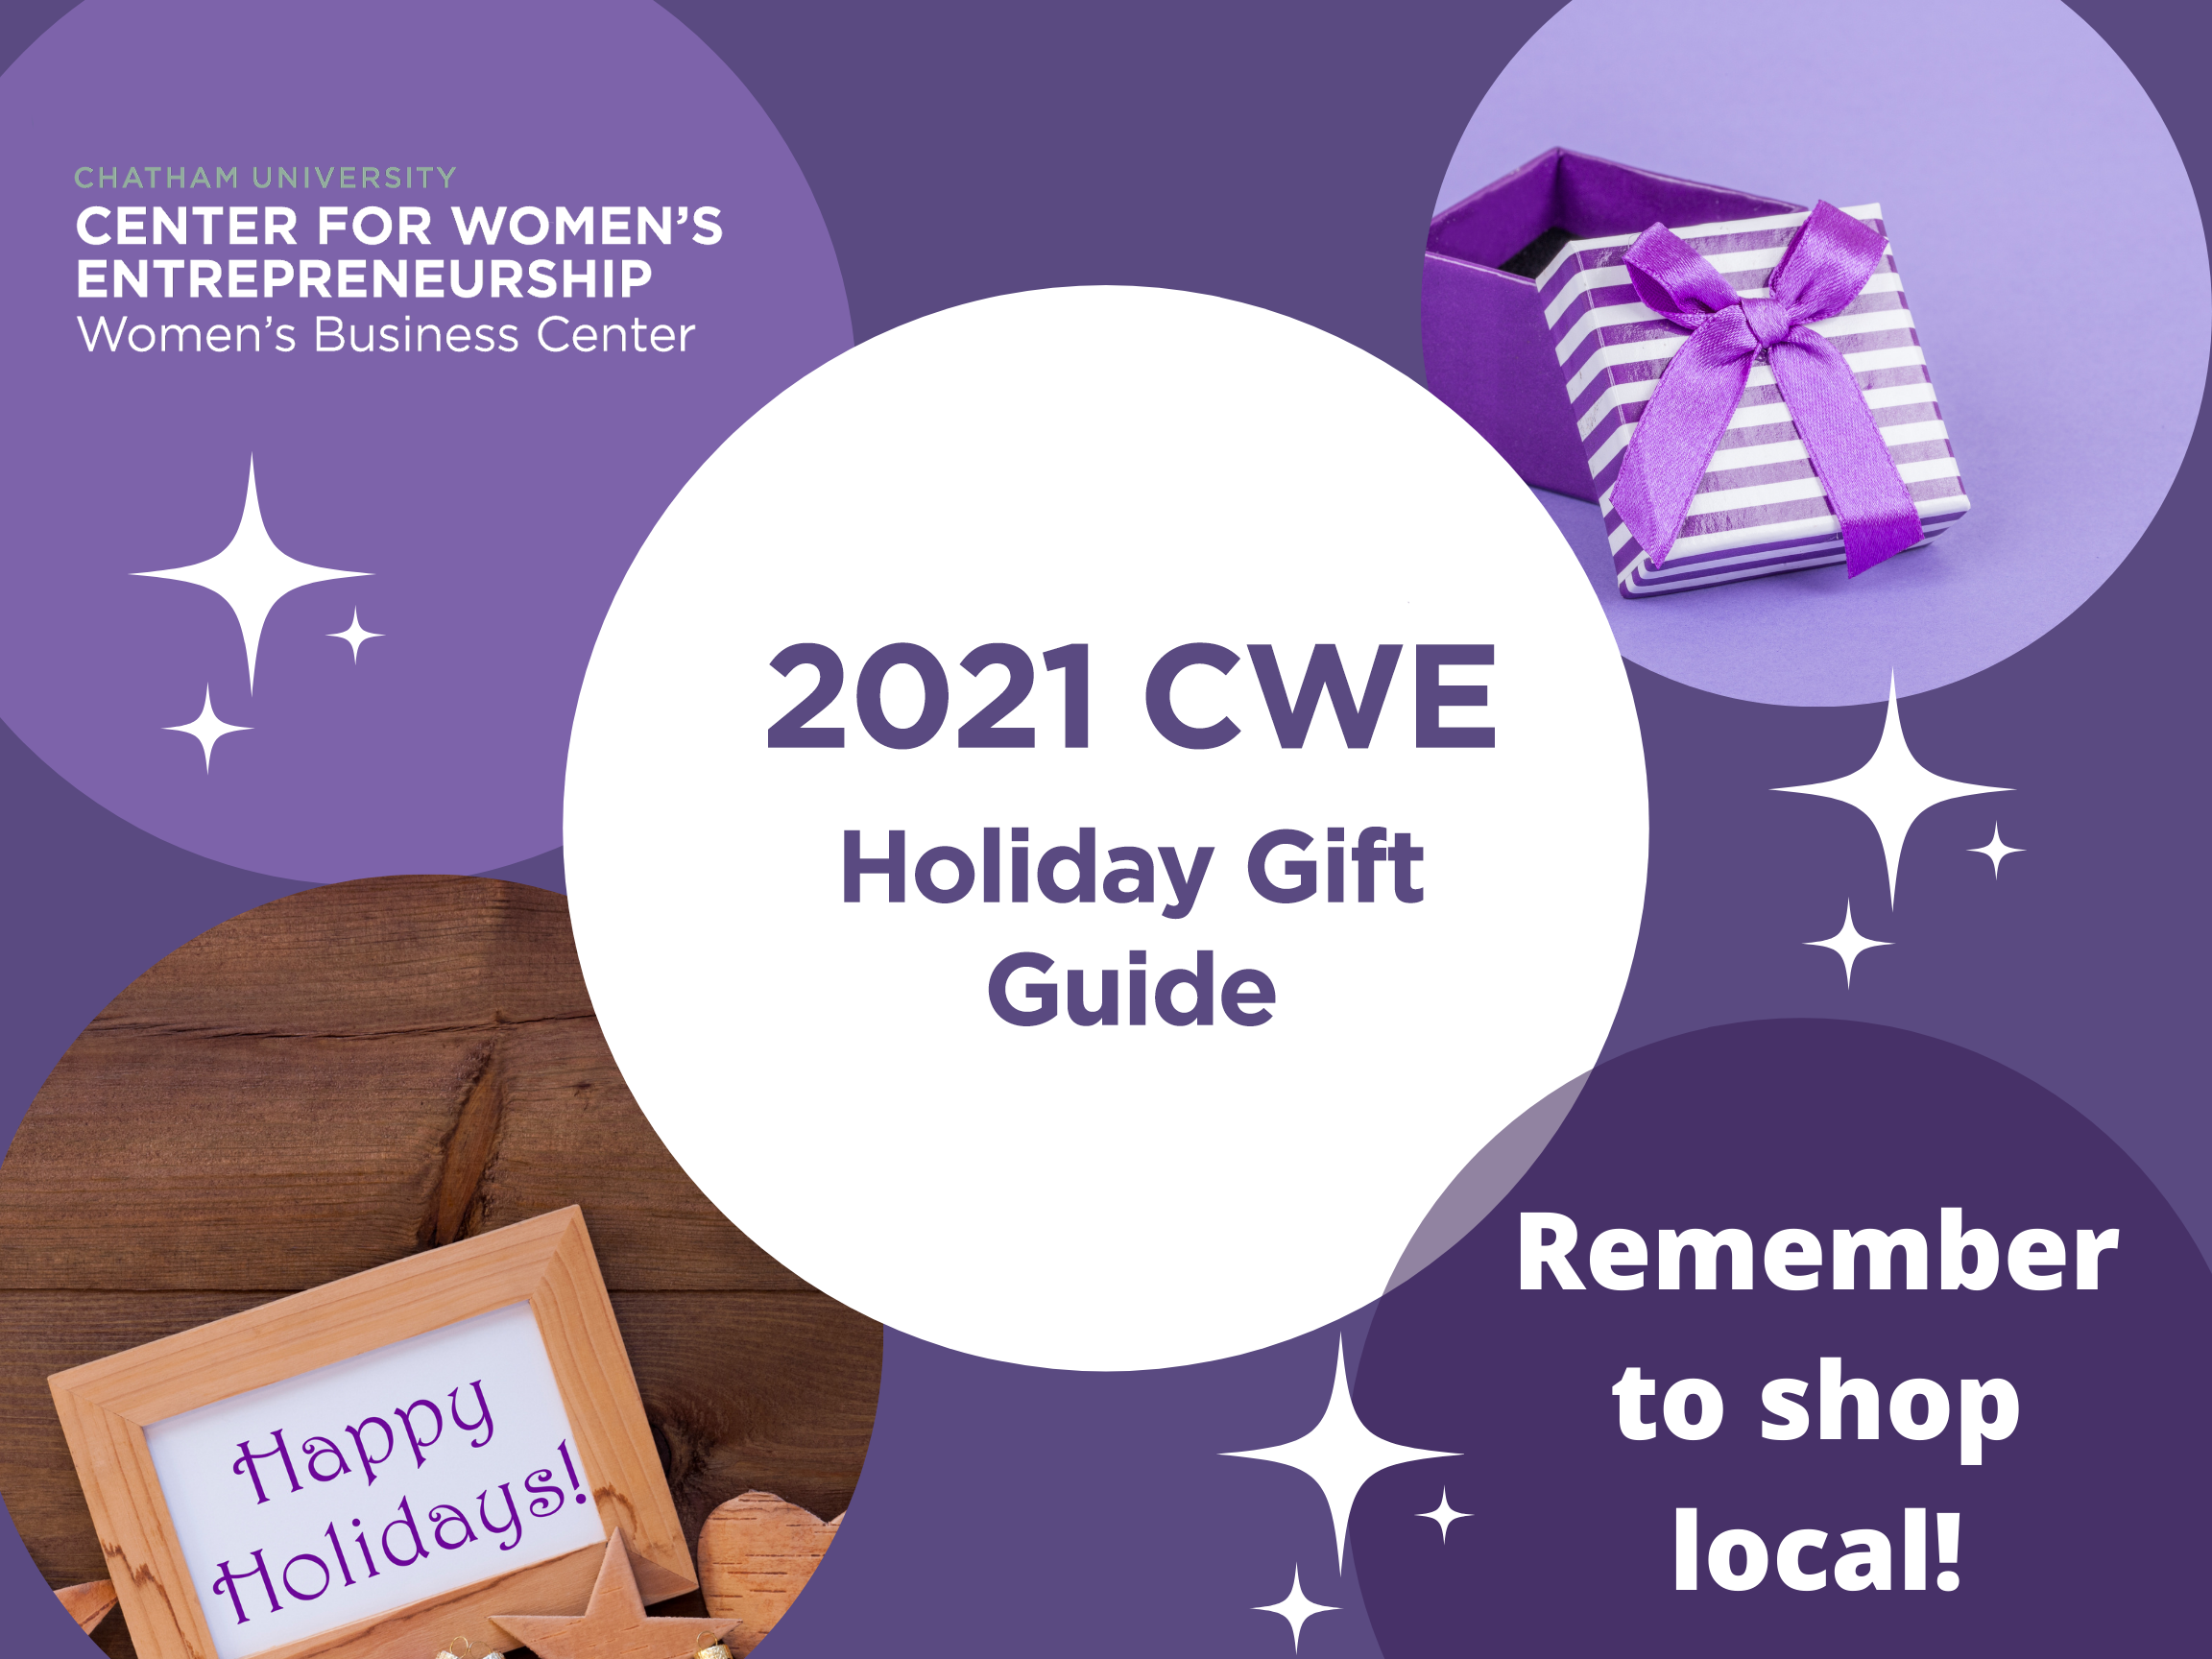 We encourage everyone to Shop Local this holiday season â€“ especially from our CWE members â€“ use the 2021 CWE Holiday Gift Guide to checkout some great gift ideas! Access the list HERE